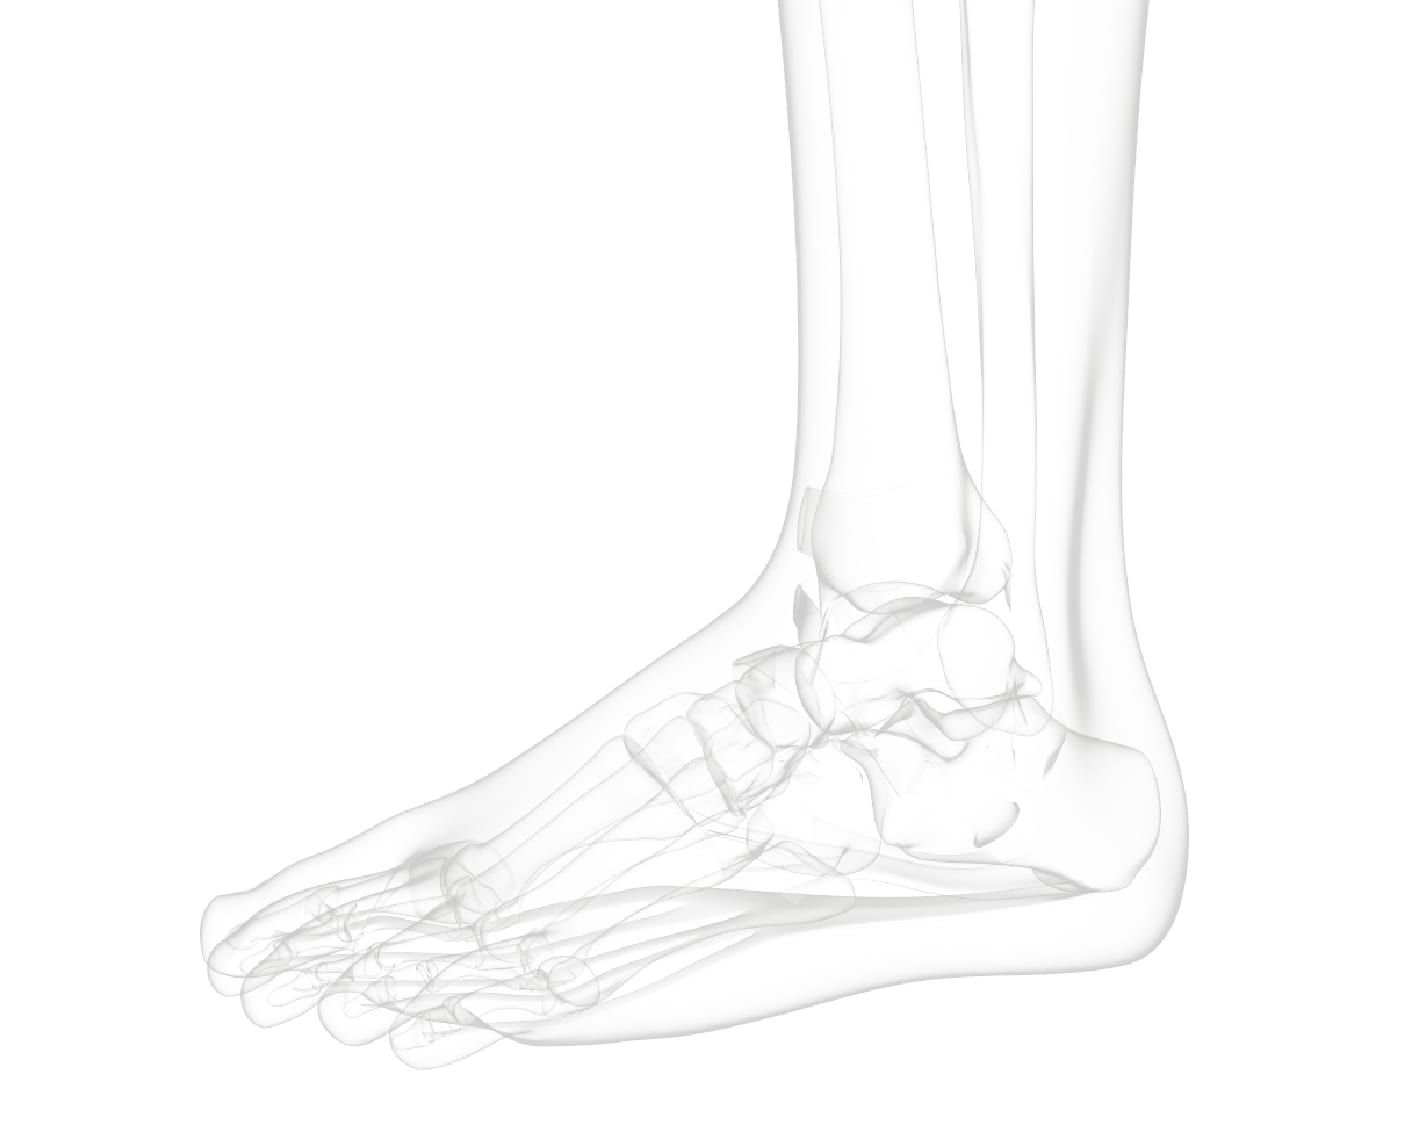 foot-ankle-2 background shade